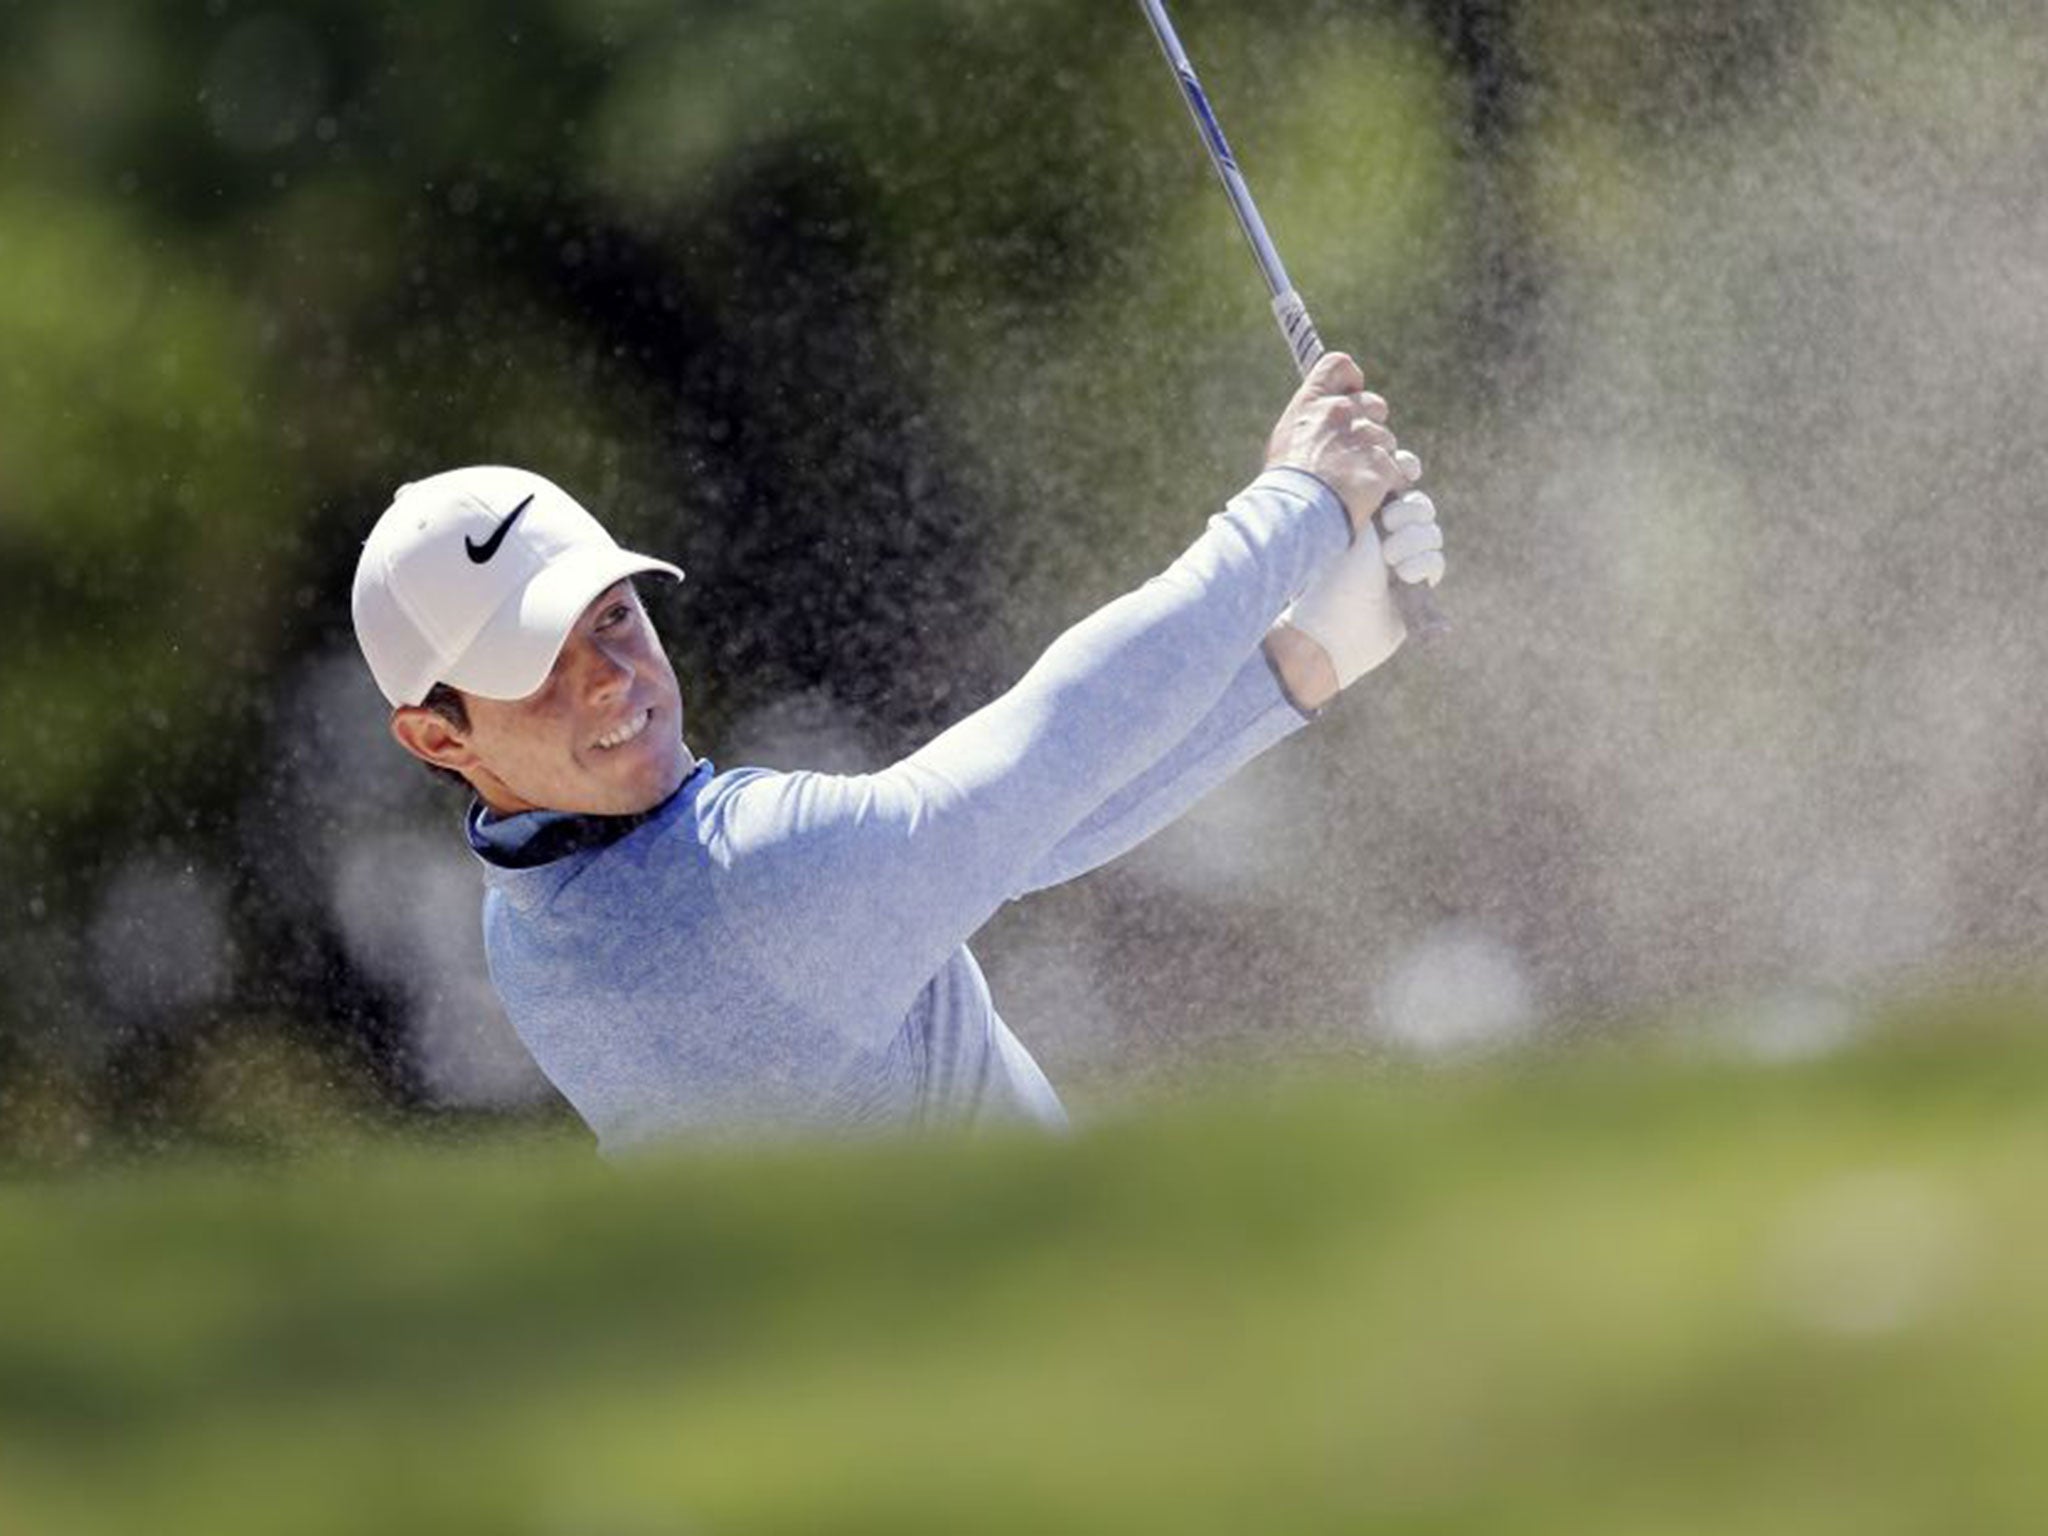 Rory McIlroy is gunning for his first Green Jacket